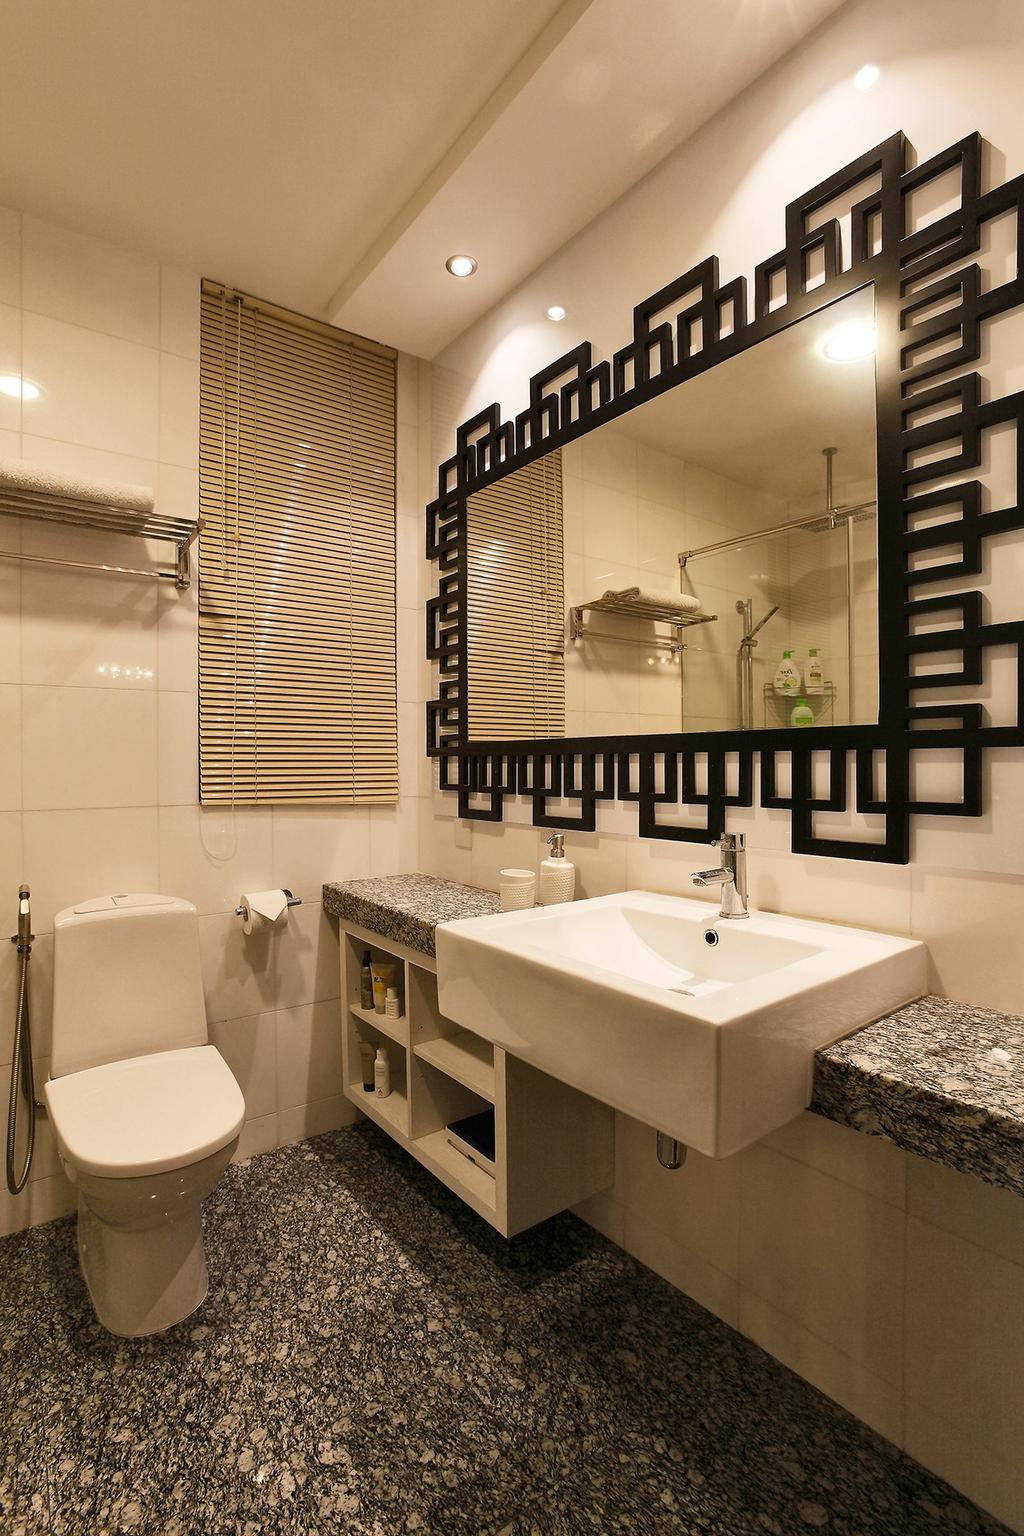 Traditional, Condo, Bathroom, Visioncrest (Oxley Rise), Interior Designer, Corazon Interior, Mirror, Wall Mounted Sink, Blinds, Wall Mounted Shelf, White Sink, Towel Hanger, Open Shelf, Recessed Lights, Grey Floor, Indoors, Interior Design, Room, Toilet